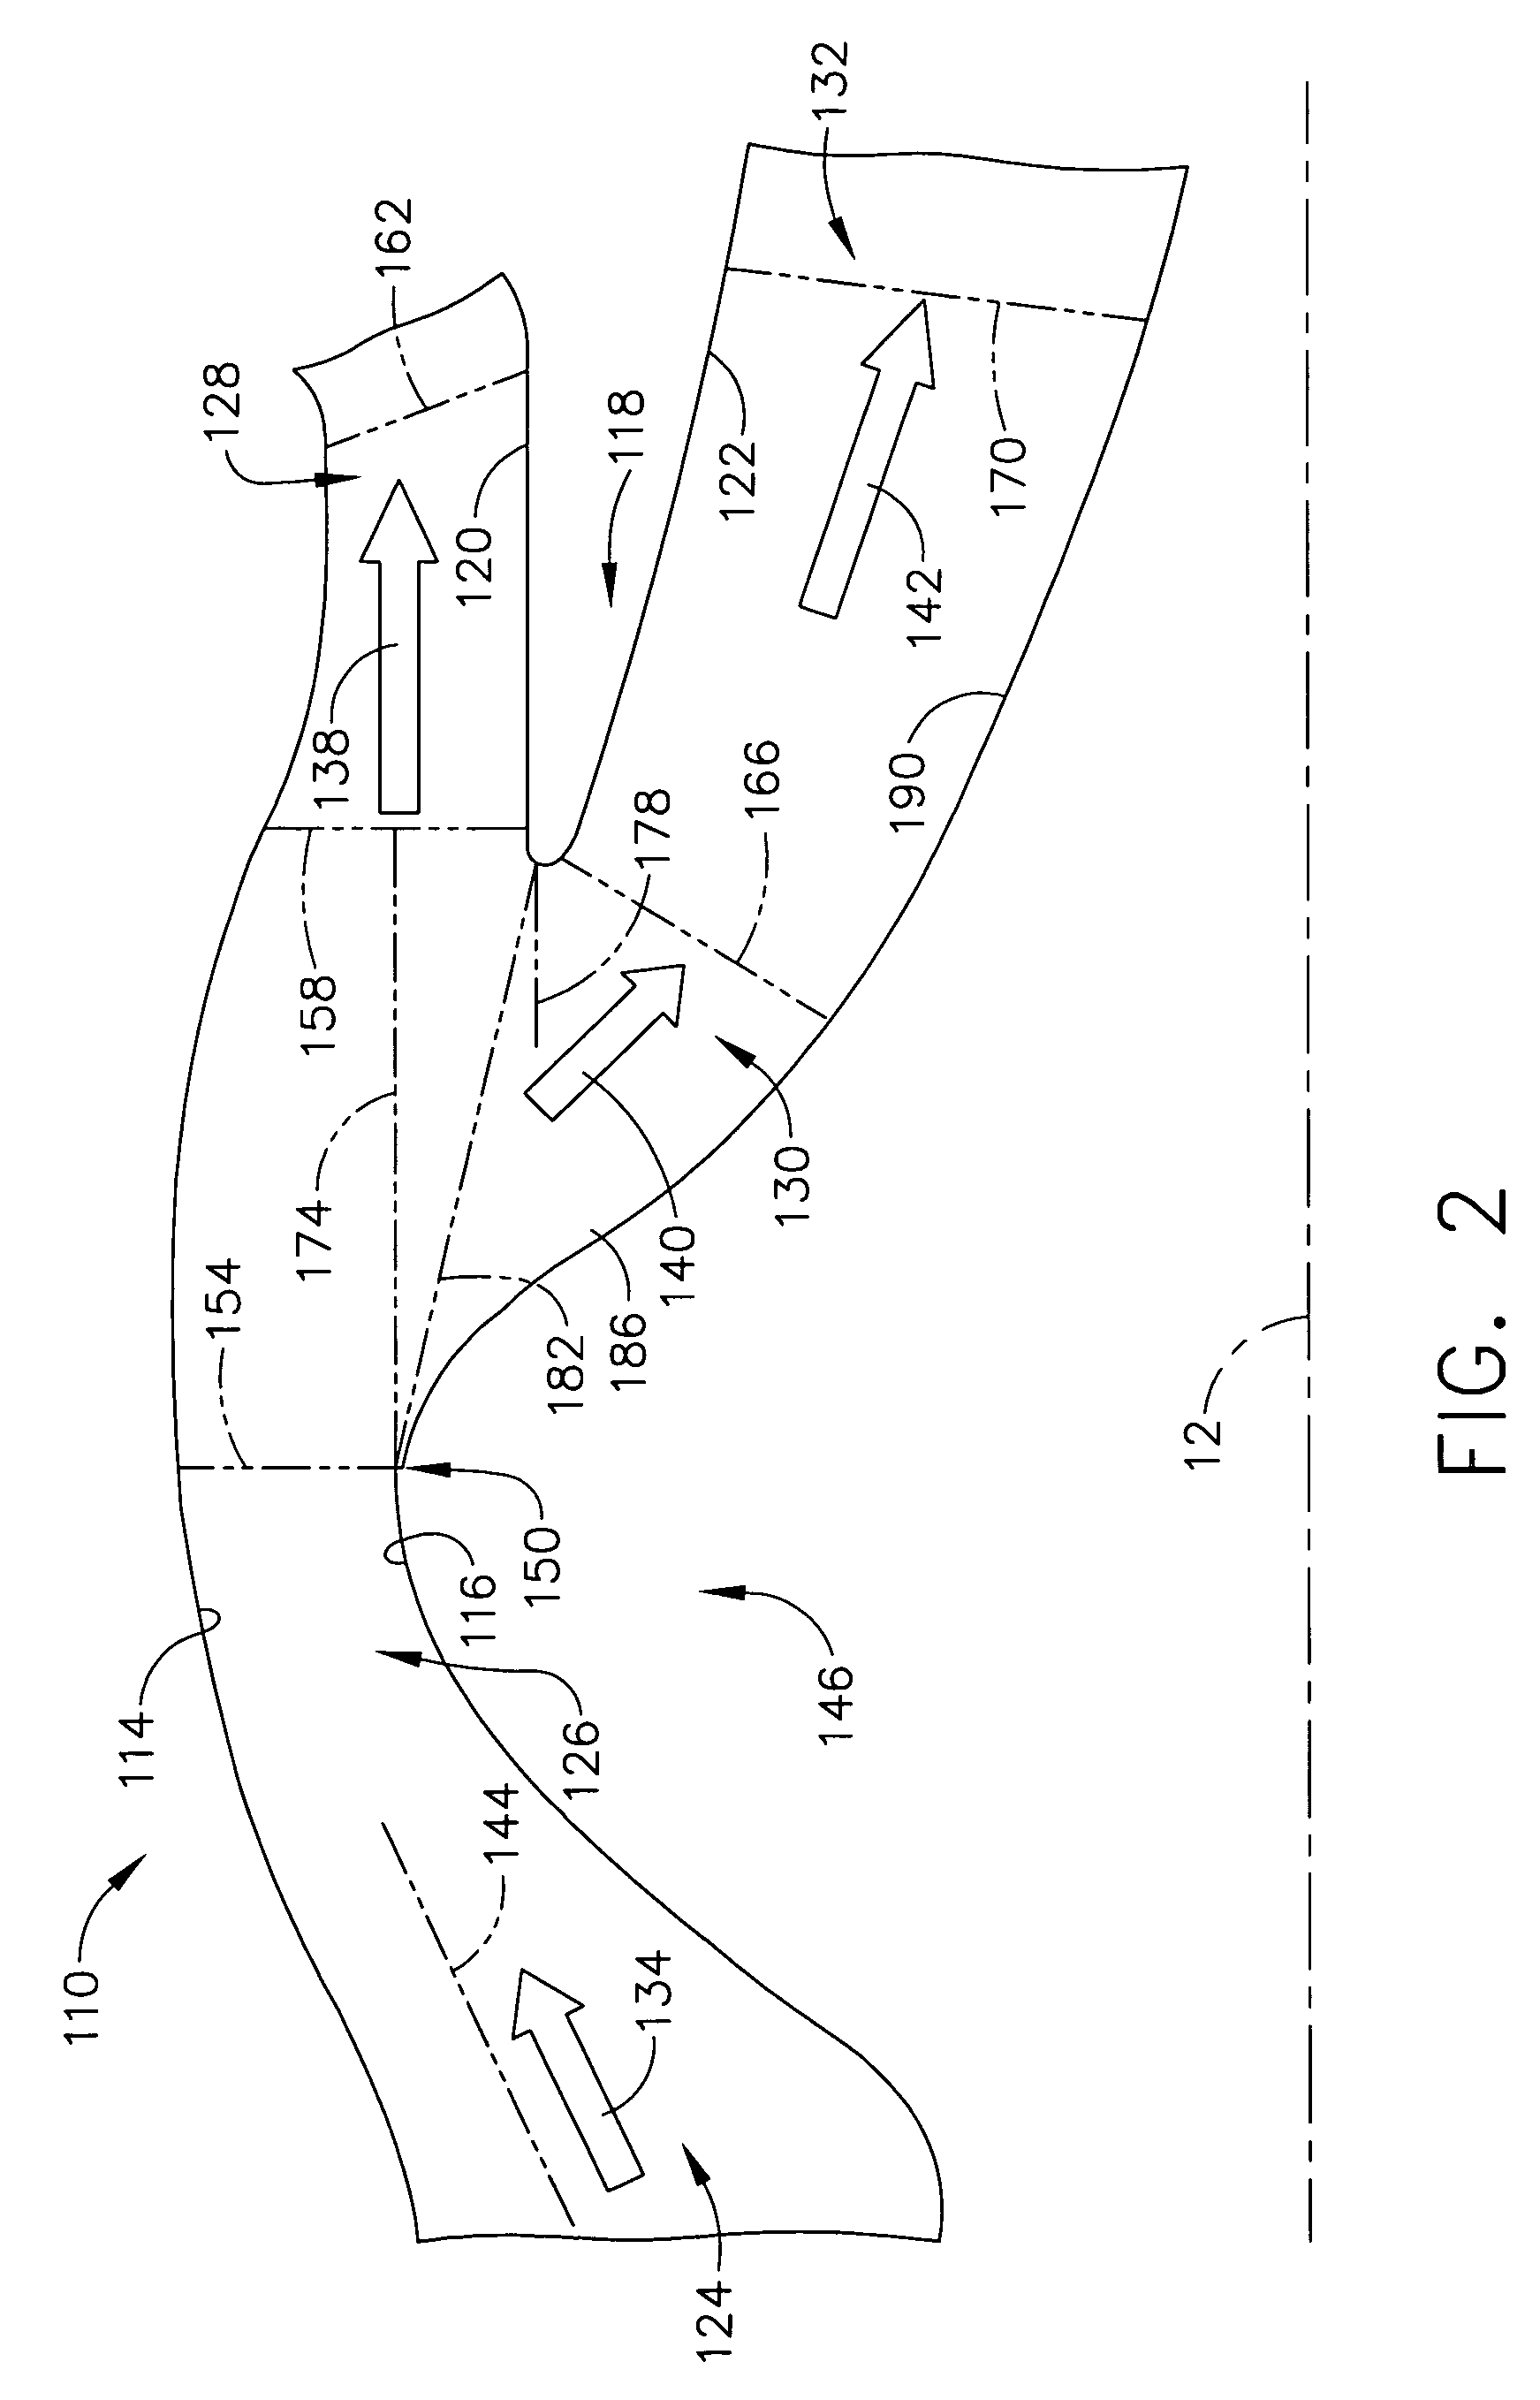 Particle separator using boundary layer control